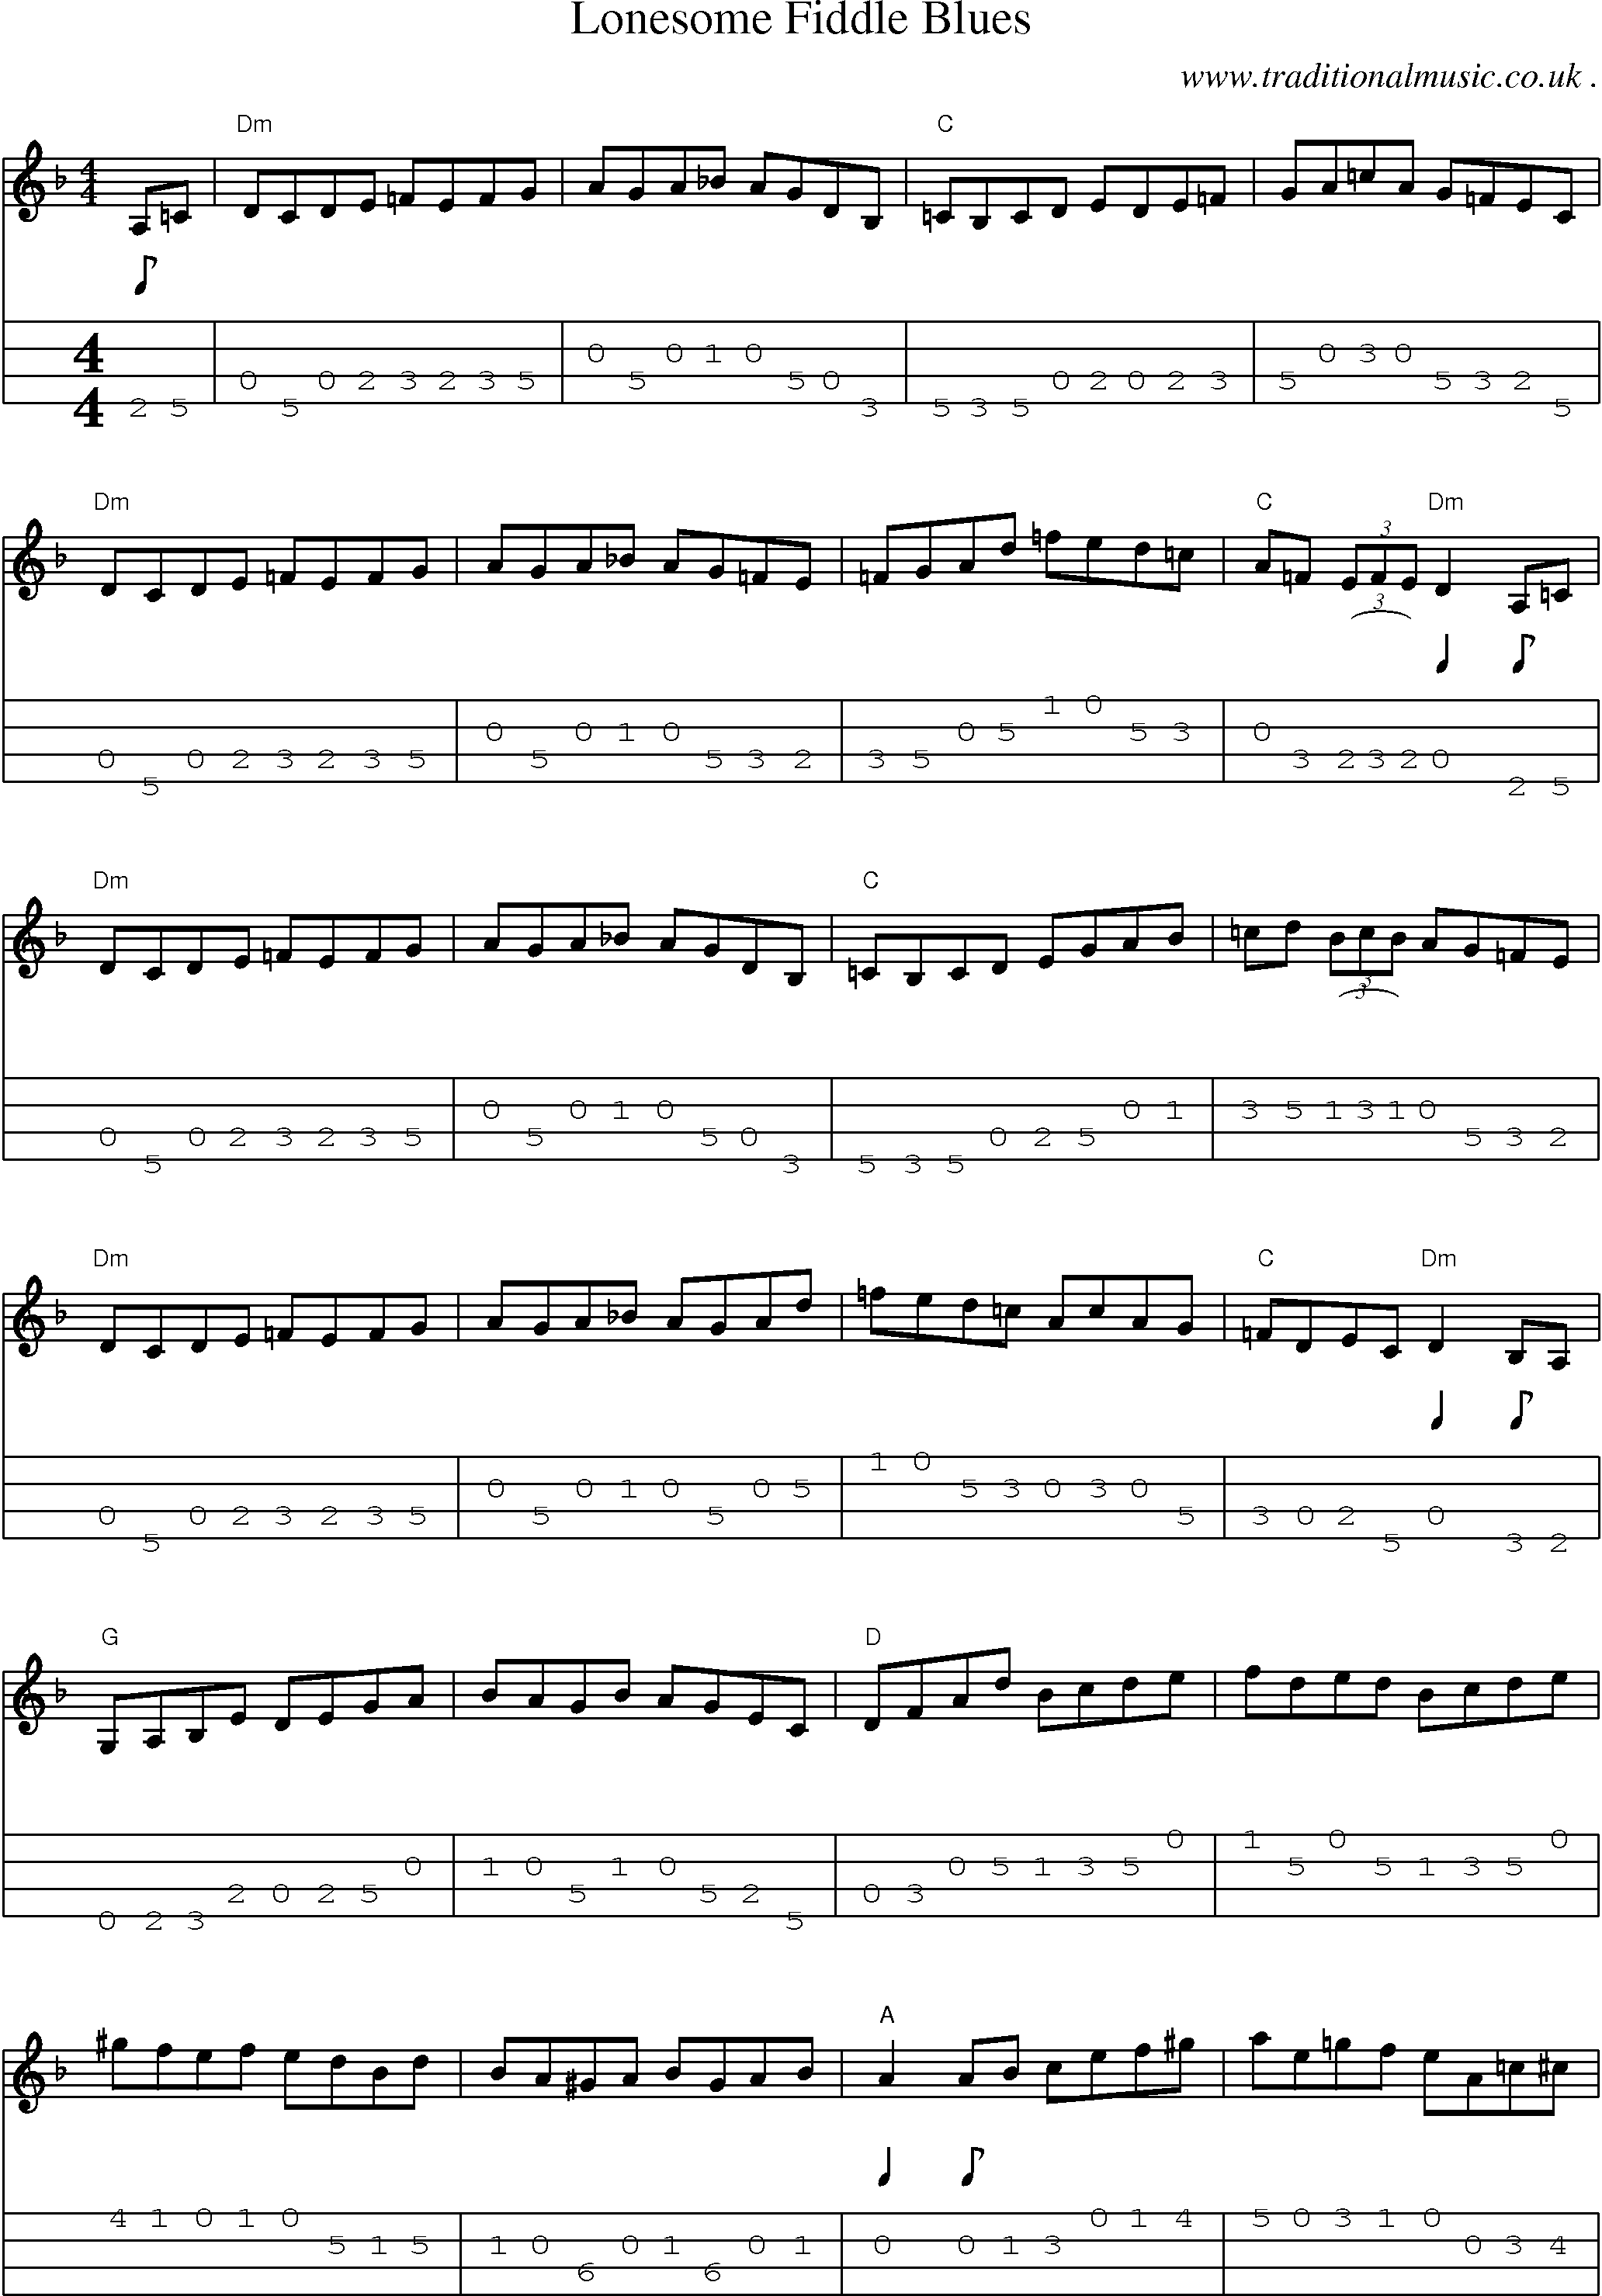 Music Score and Mandolin Tabs for Lonesome Fiddle Blues